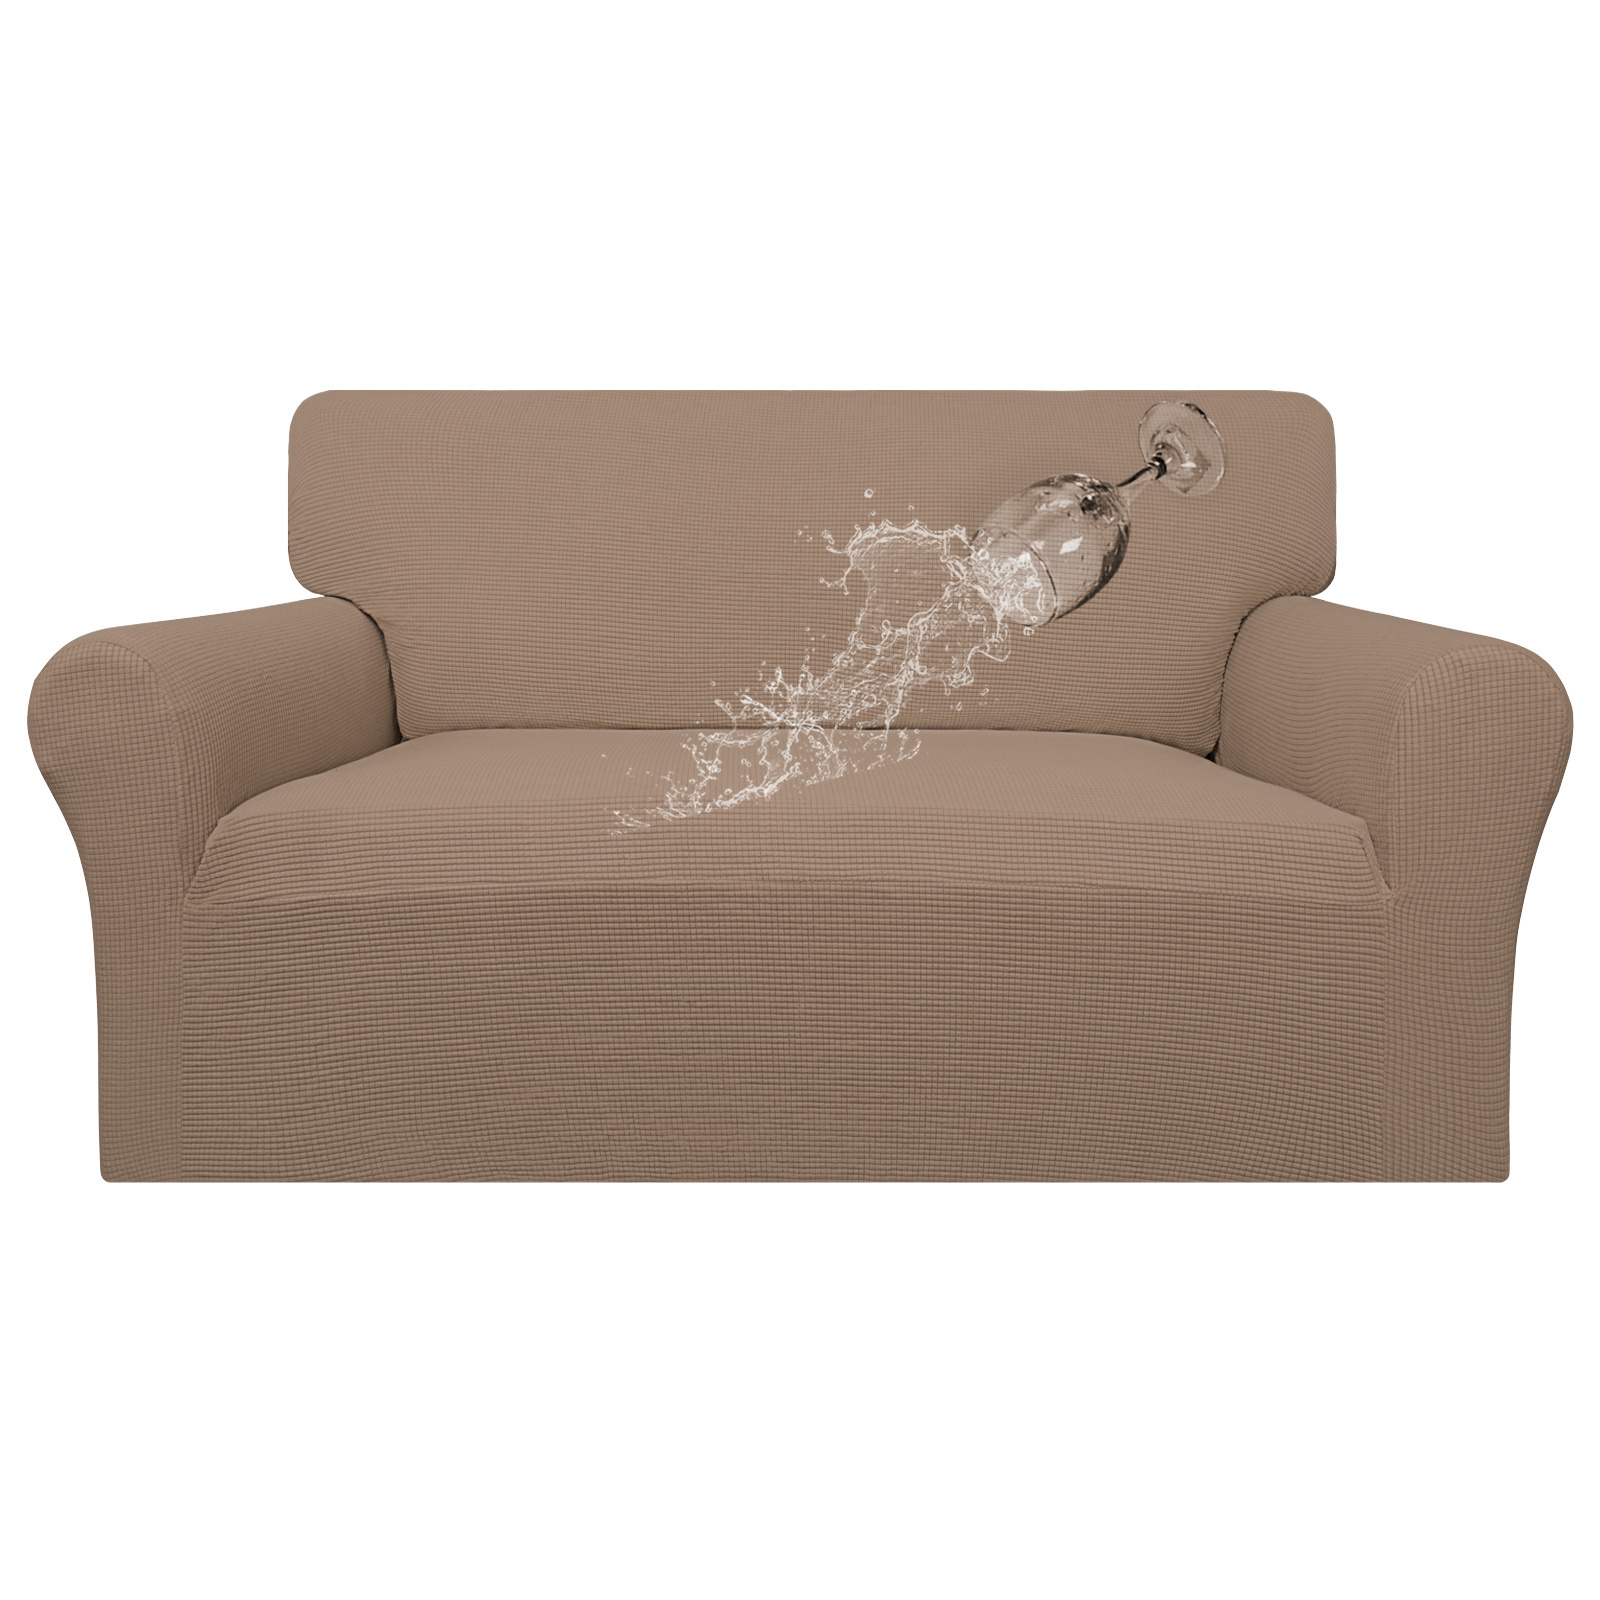 Easy-Going 100% Waterproof Couch Cover, Loveseat, Camel - Walmart.com ...